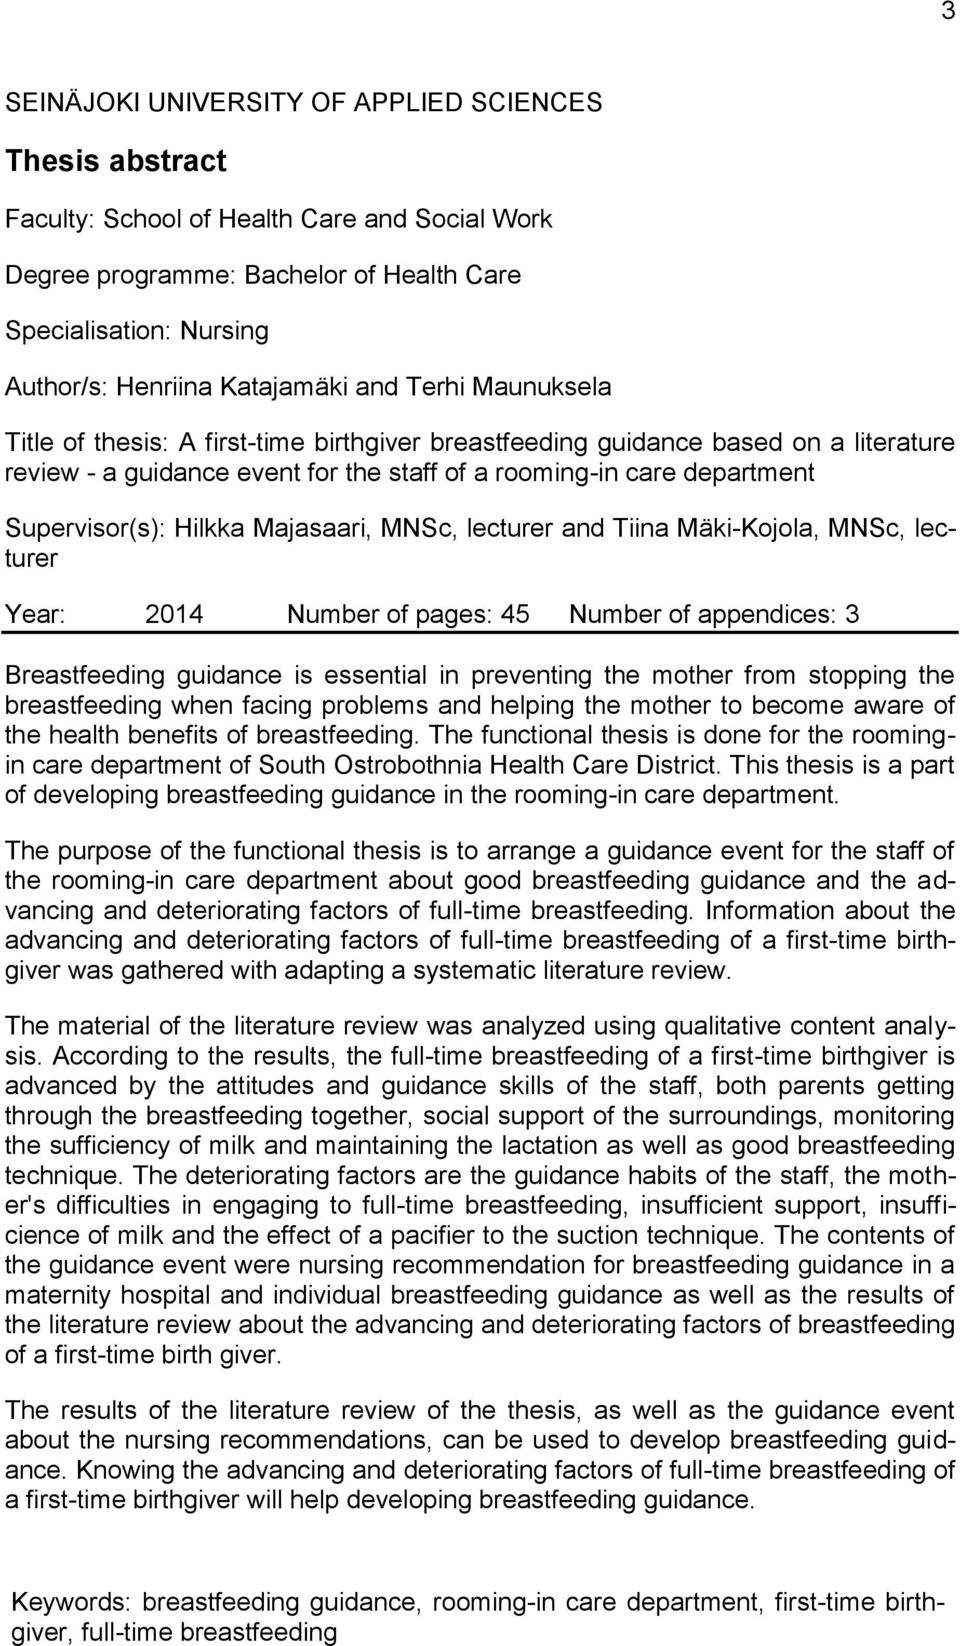 Supervisor(s): Hilkka Majasaari, MNSc, lecturer and Tiina Mäki-Kojola, MNSc, lecturer Year: 2014 Number of pages: 45 Number of appendices: 3 Breastfeeding guidance is essential in preventing the